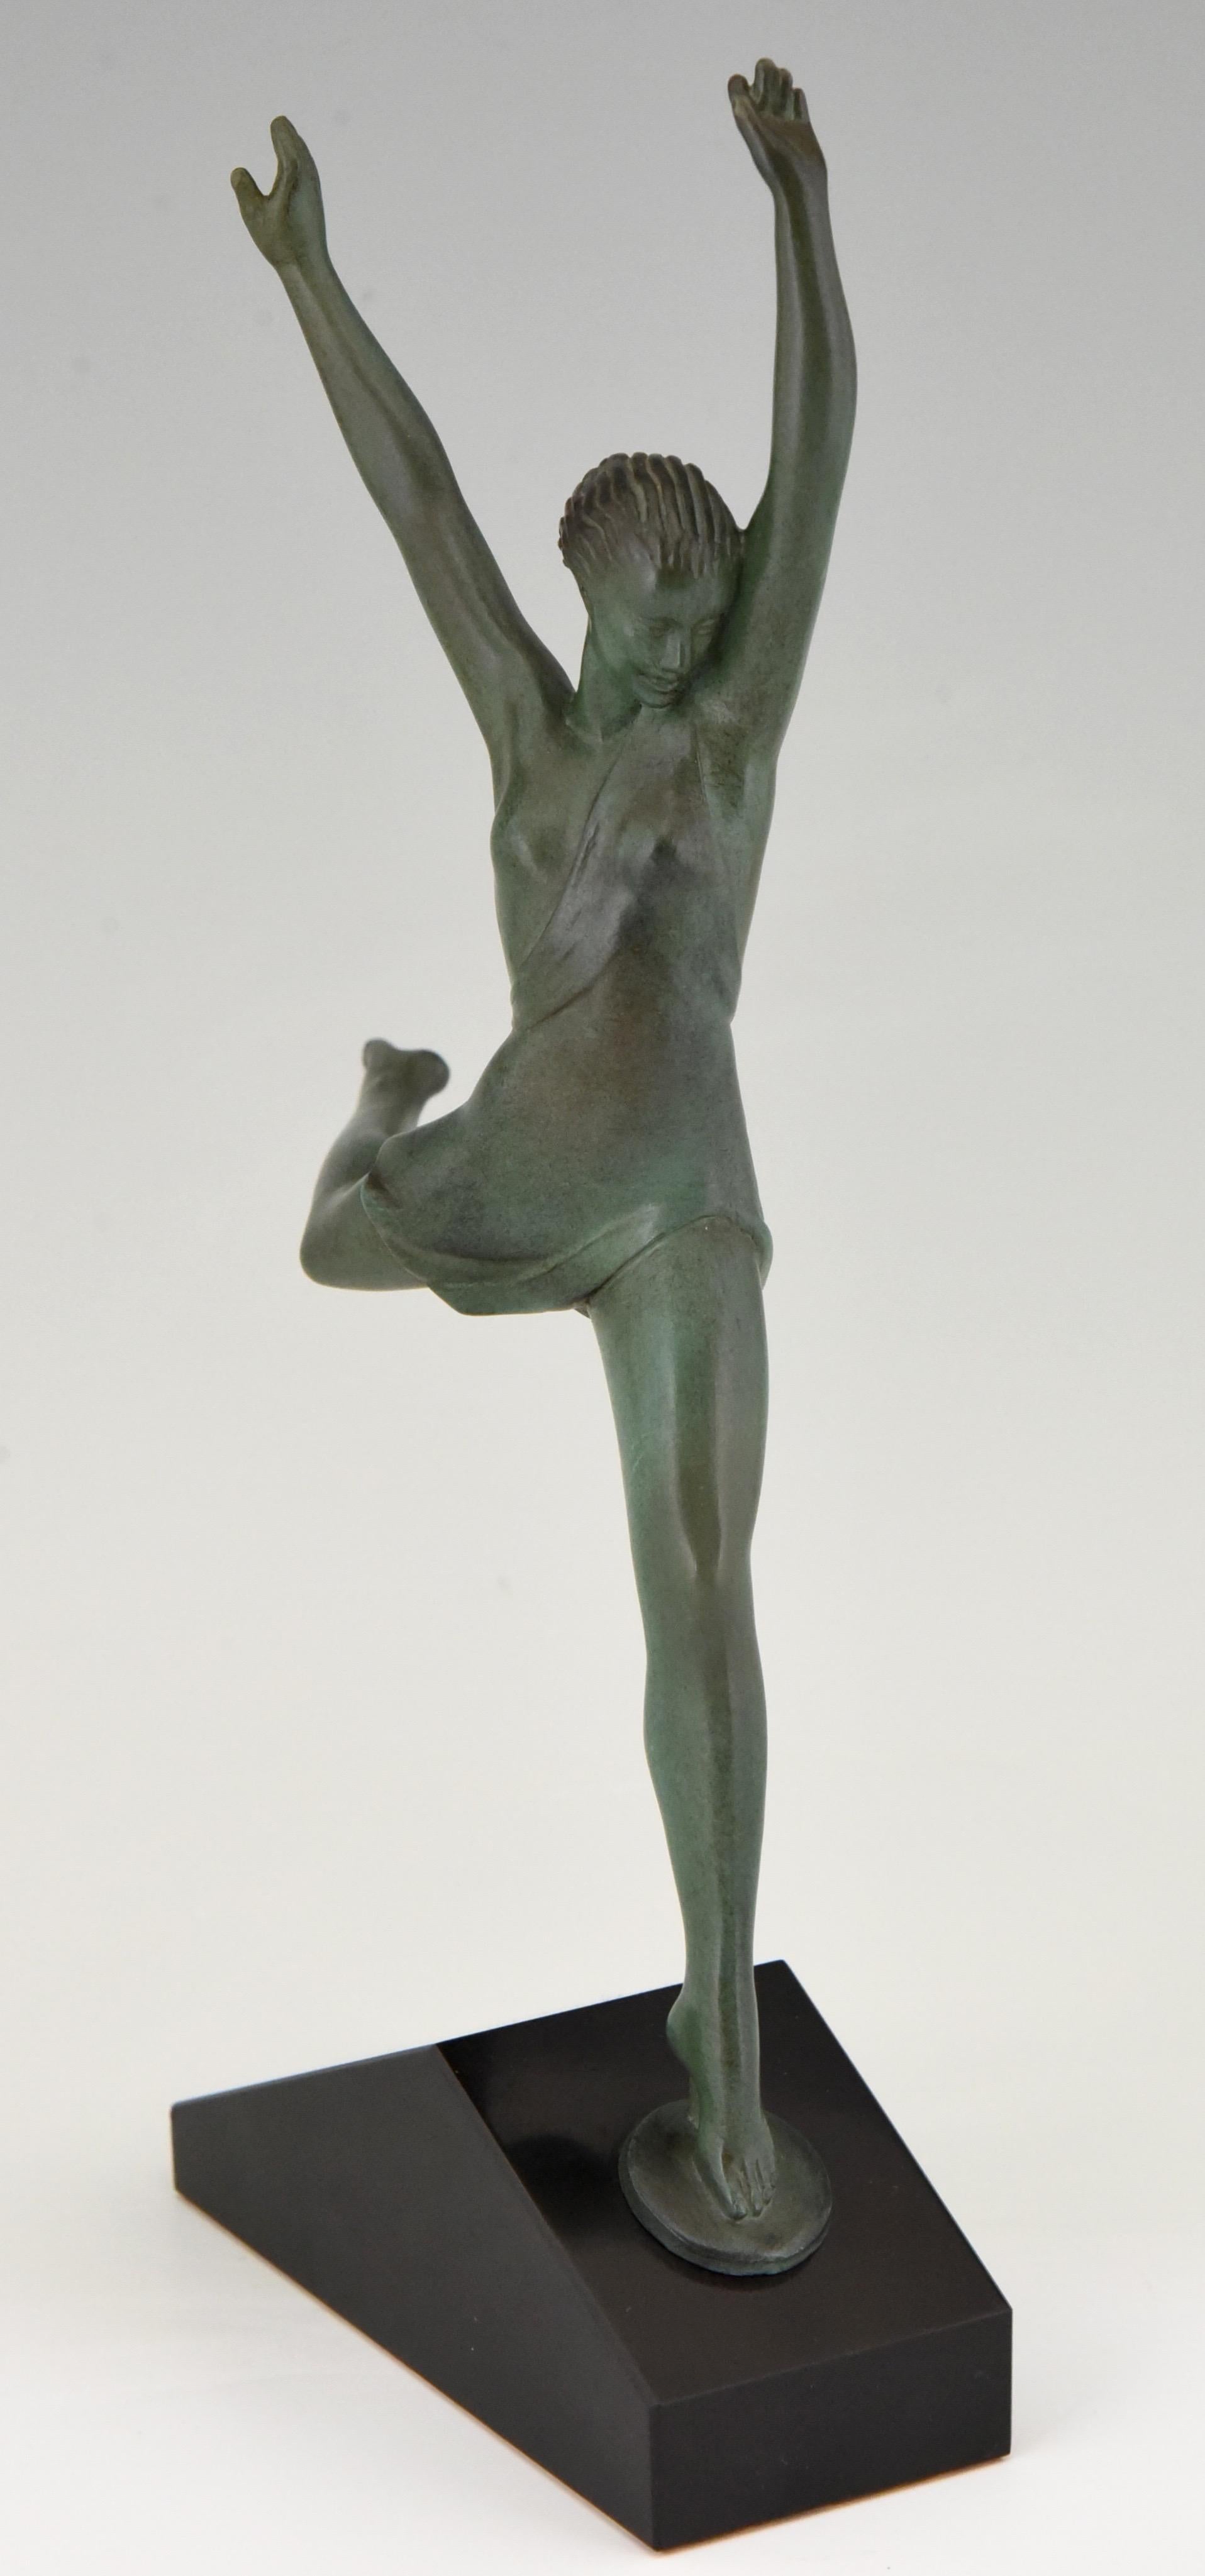 French Olympe Art Deco Sculpture Running Woman Fayral Pierre Le Faguays, France, 1930